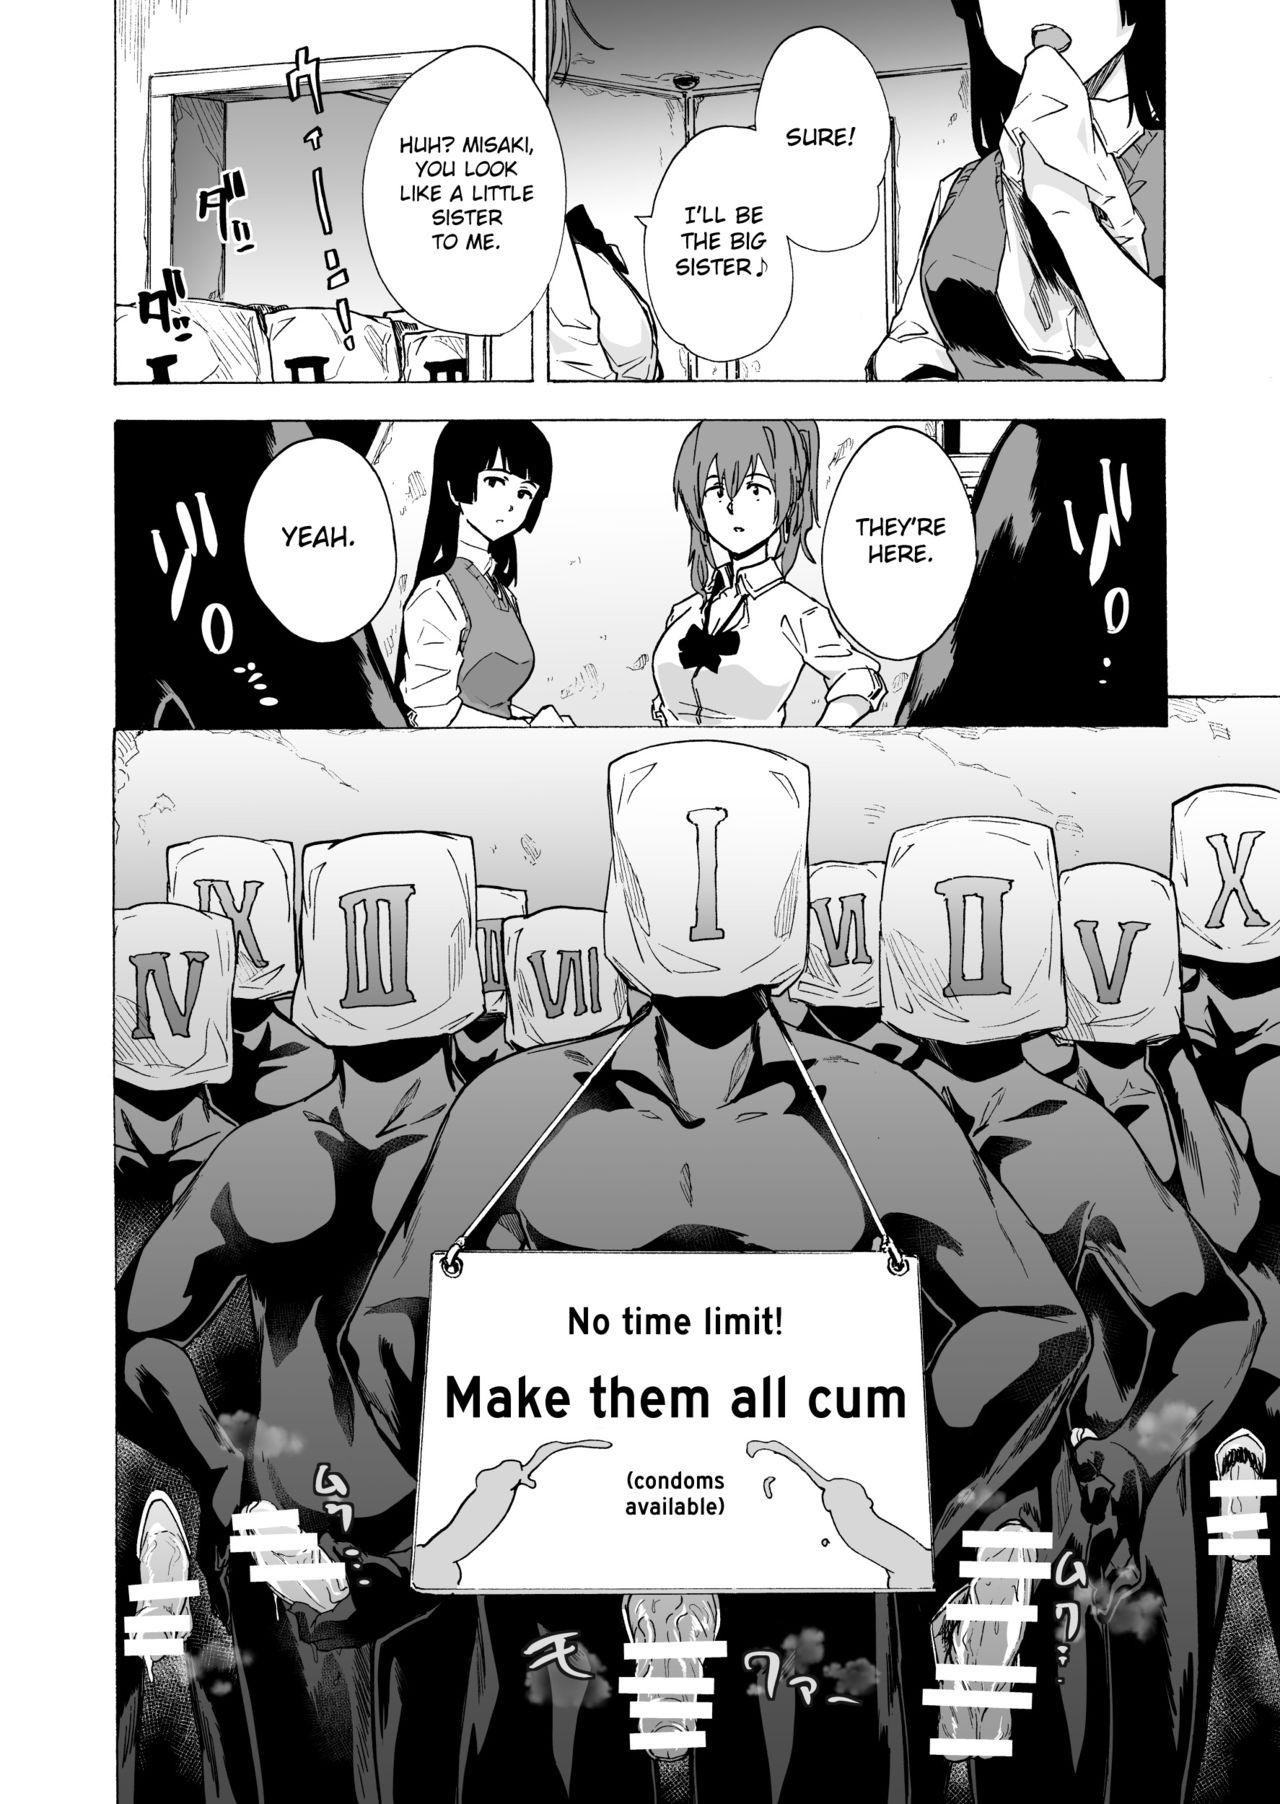 Free Fuck GAME OF BITCHES 2 - Original Pinay - Page 12